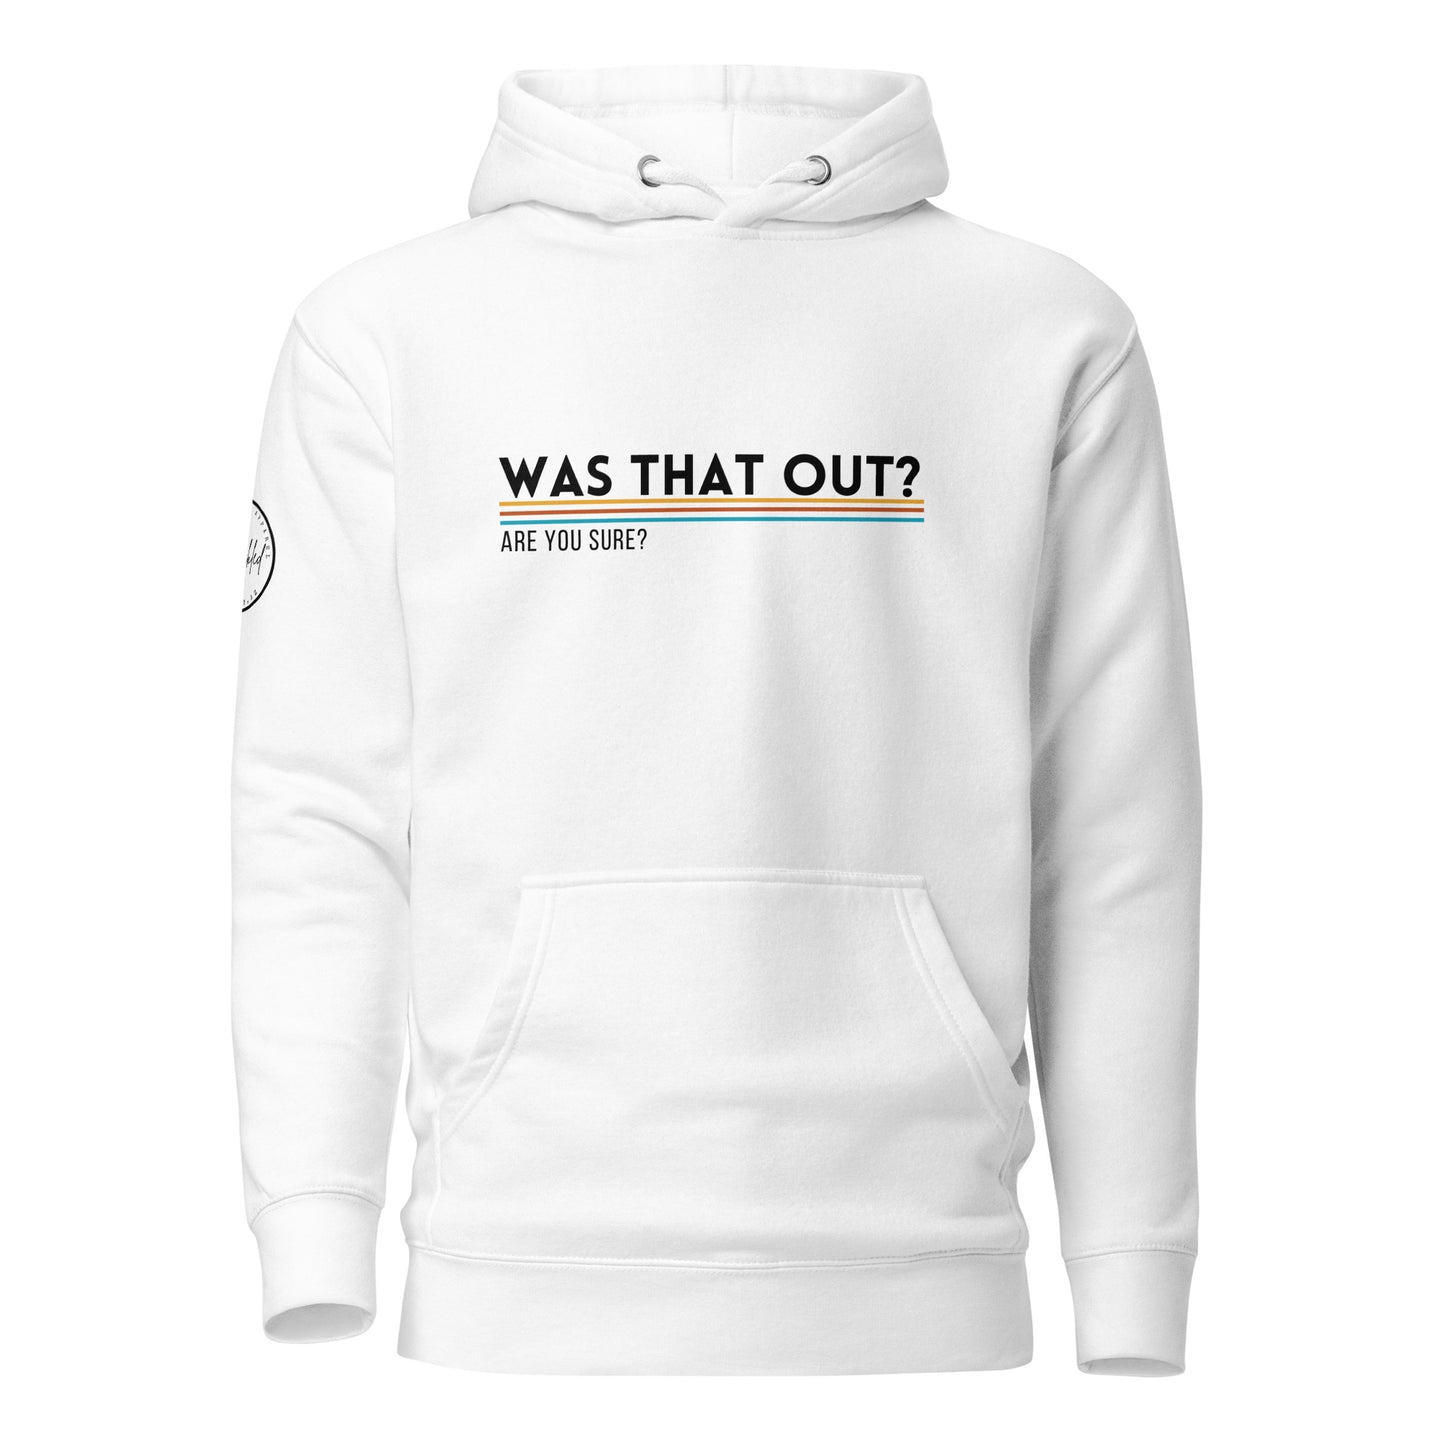 Was That Out? Unisex Hoodie